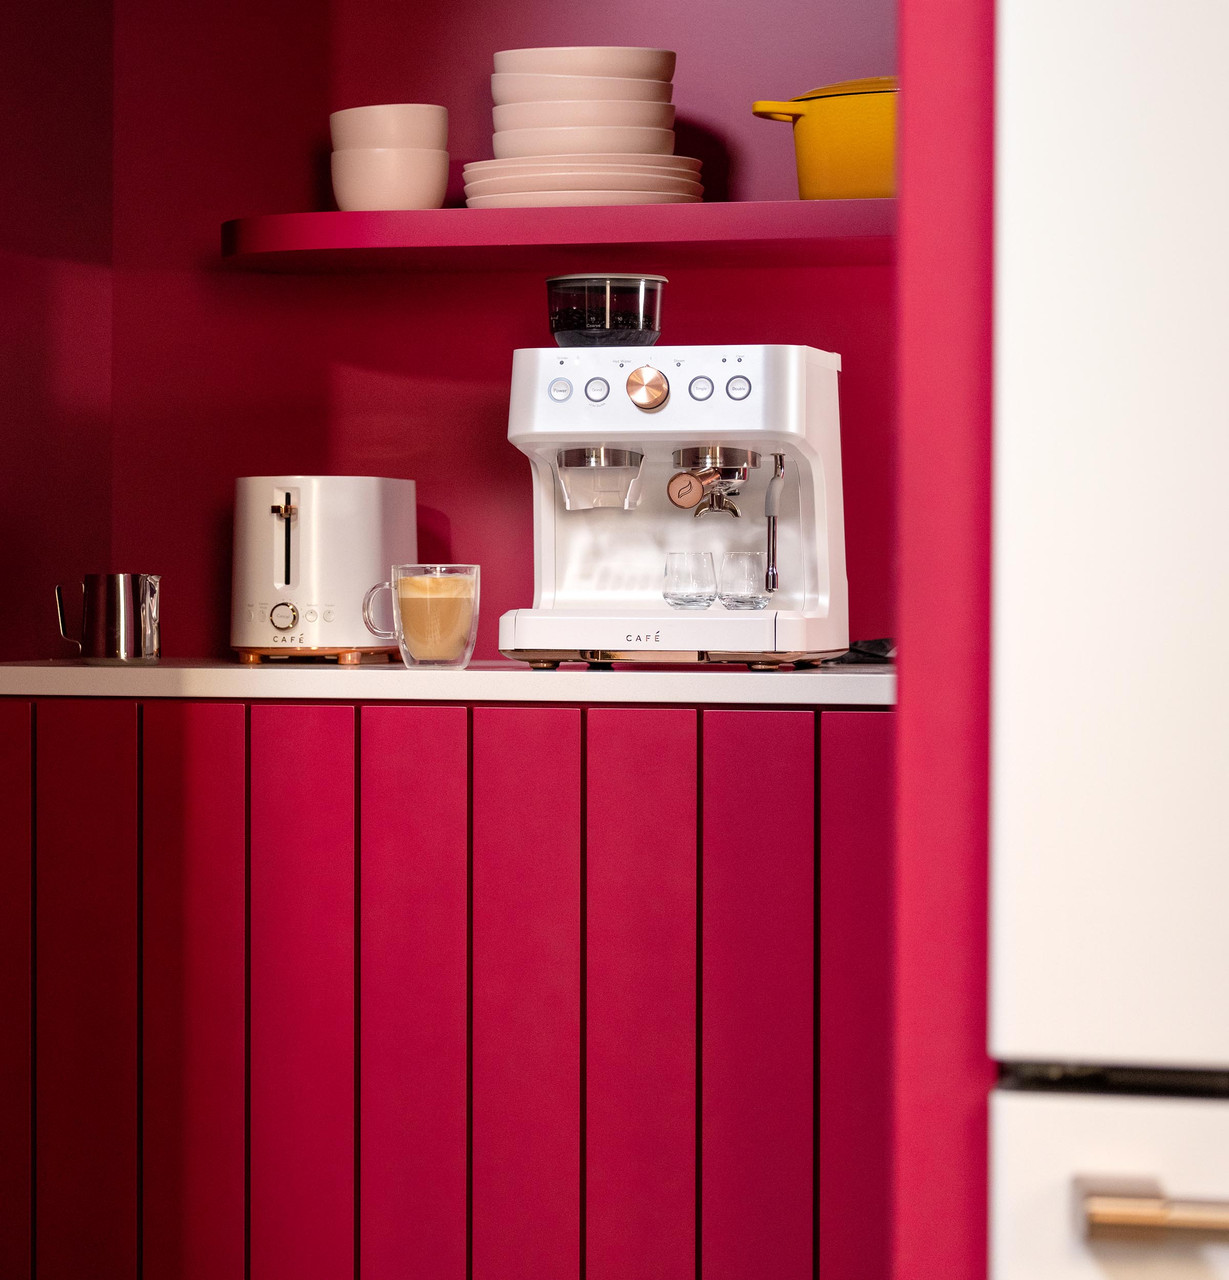 BELLA Expands Its Fashionable Line Of Specialty Kitchen Appliances